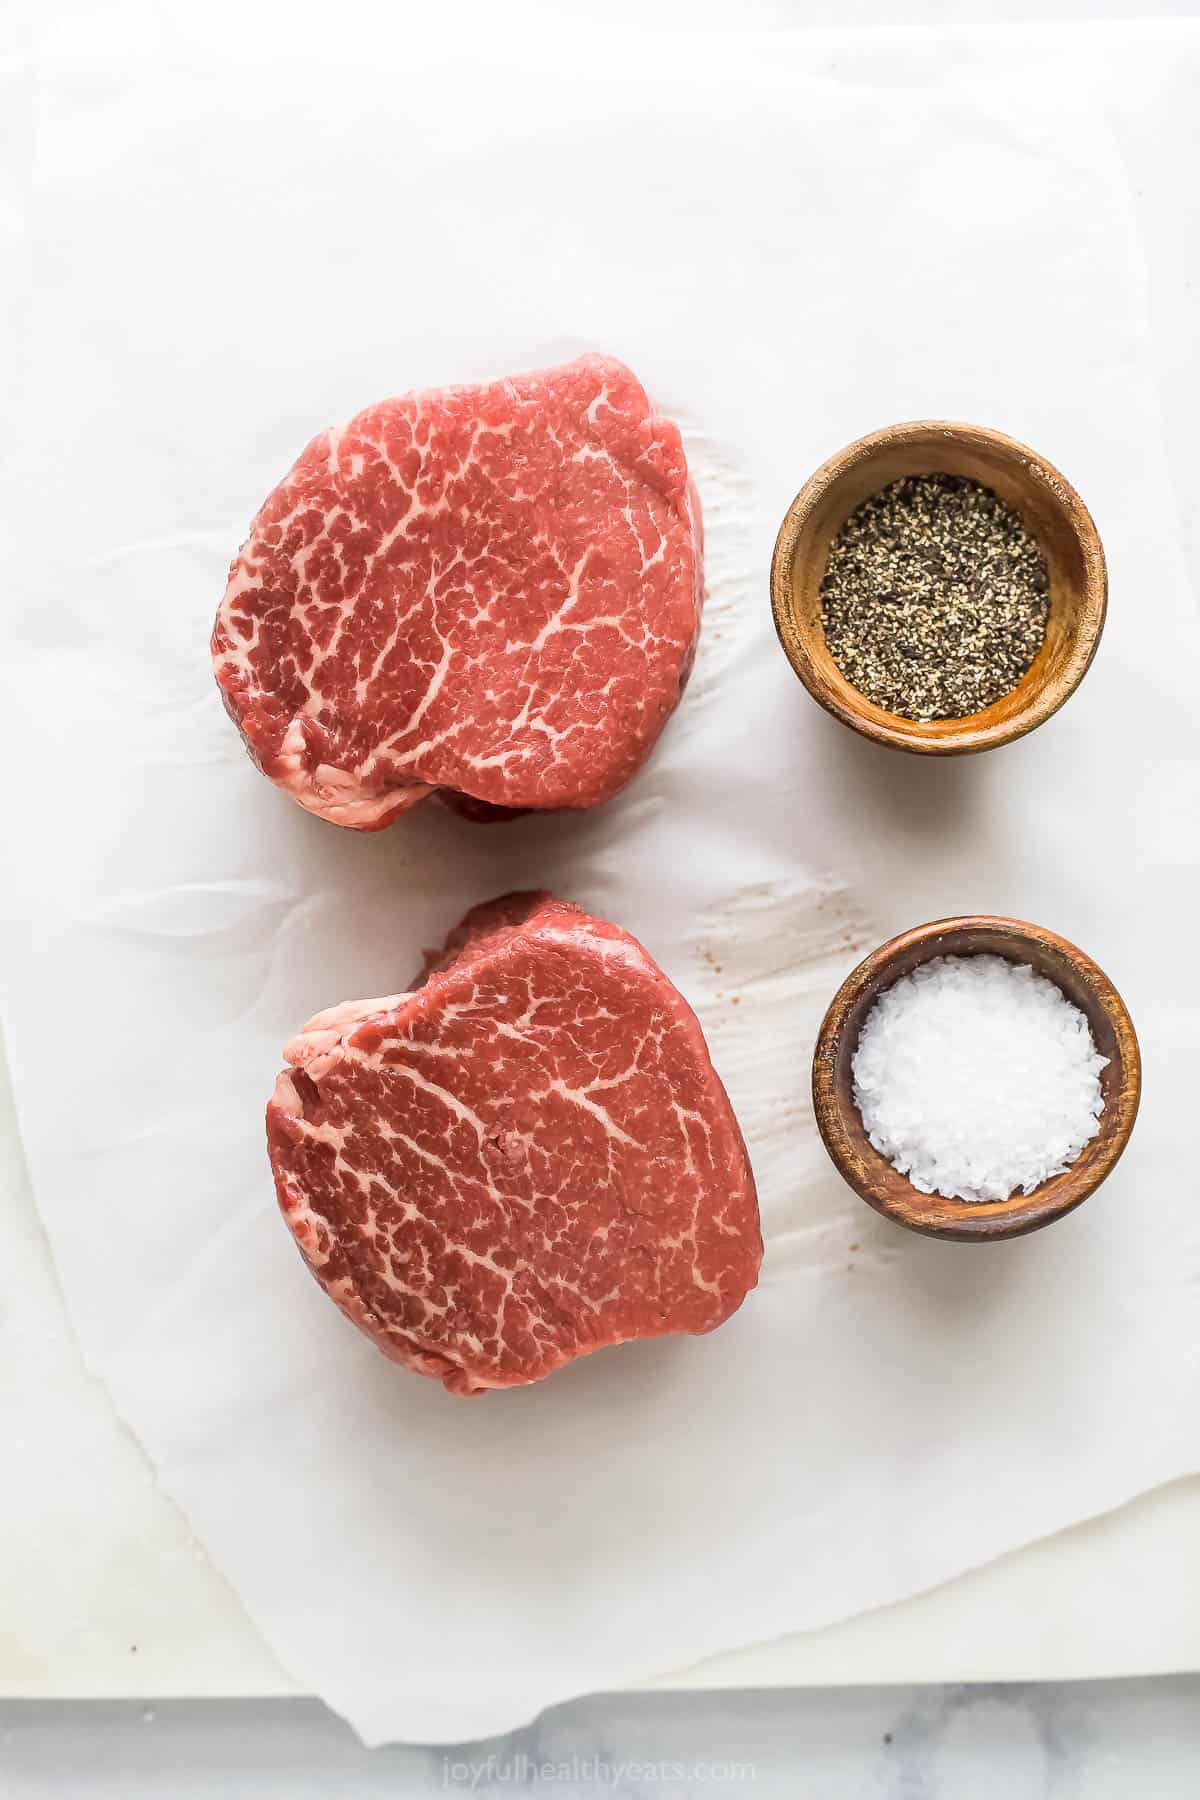 Ingredients for grilled filet mignon. 